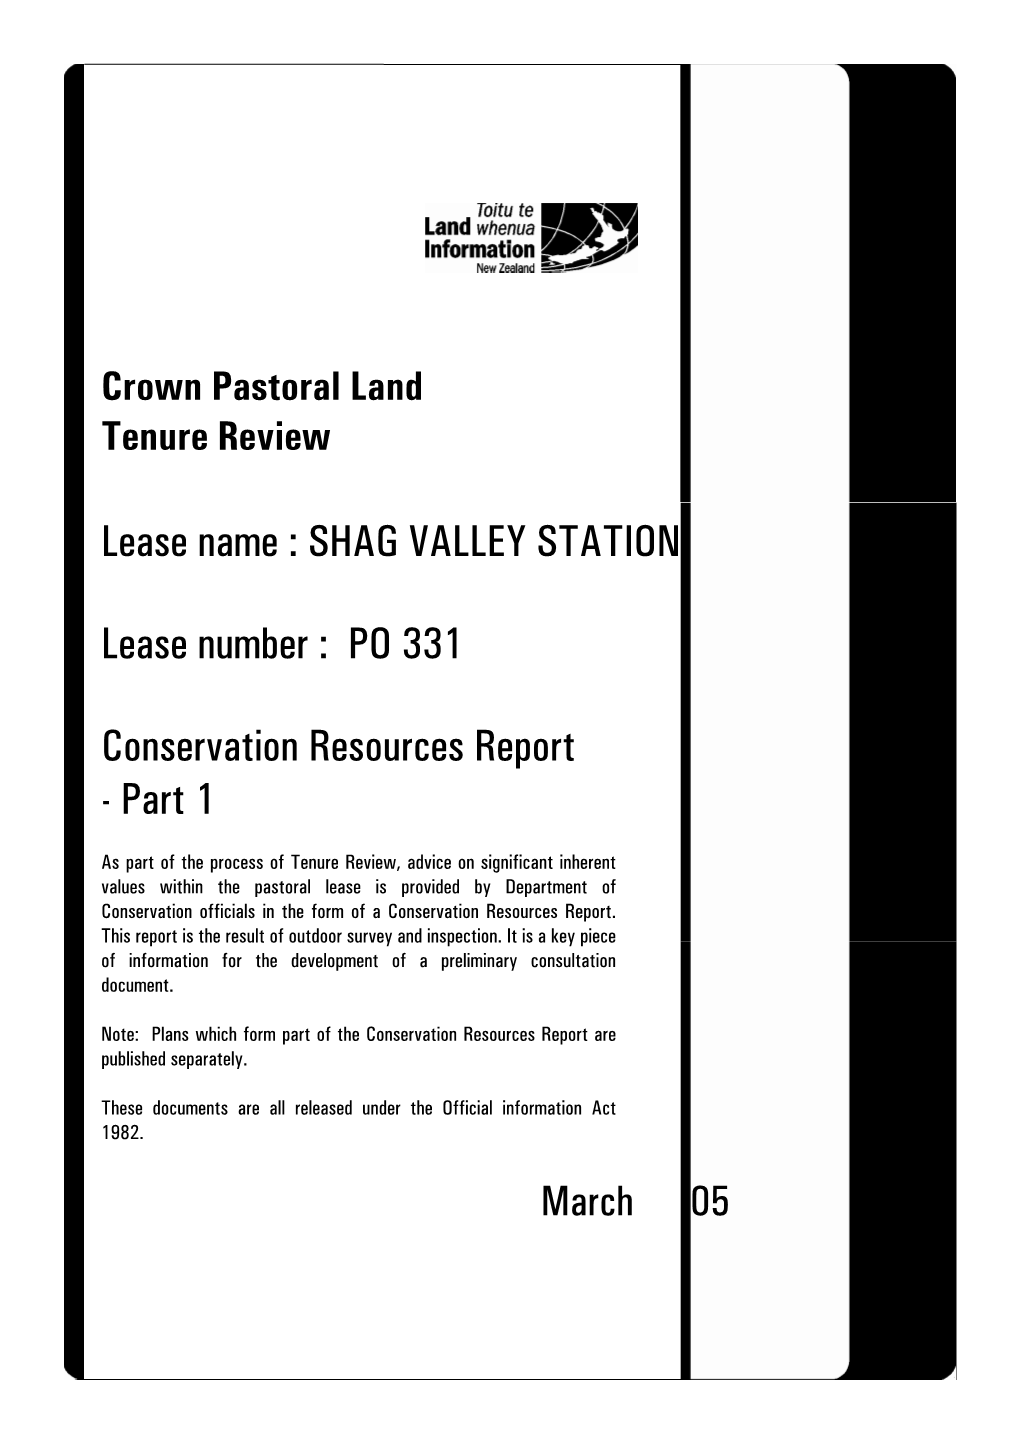 Crown Pastoral-Tenure Review-Shag Valley Station-Conservation